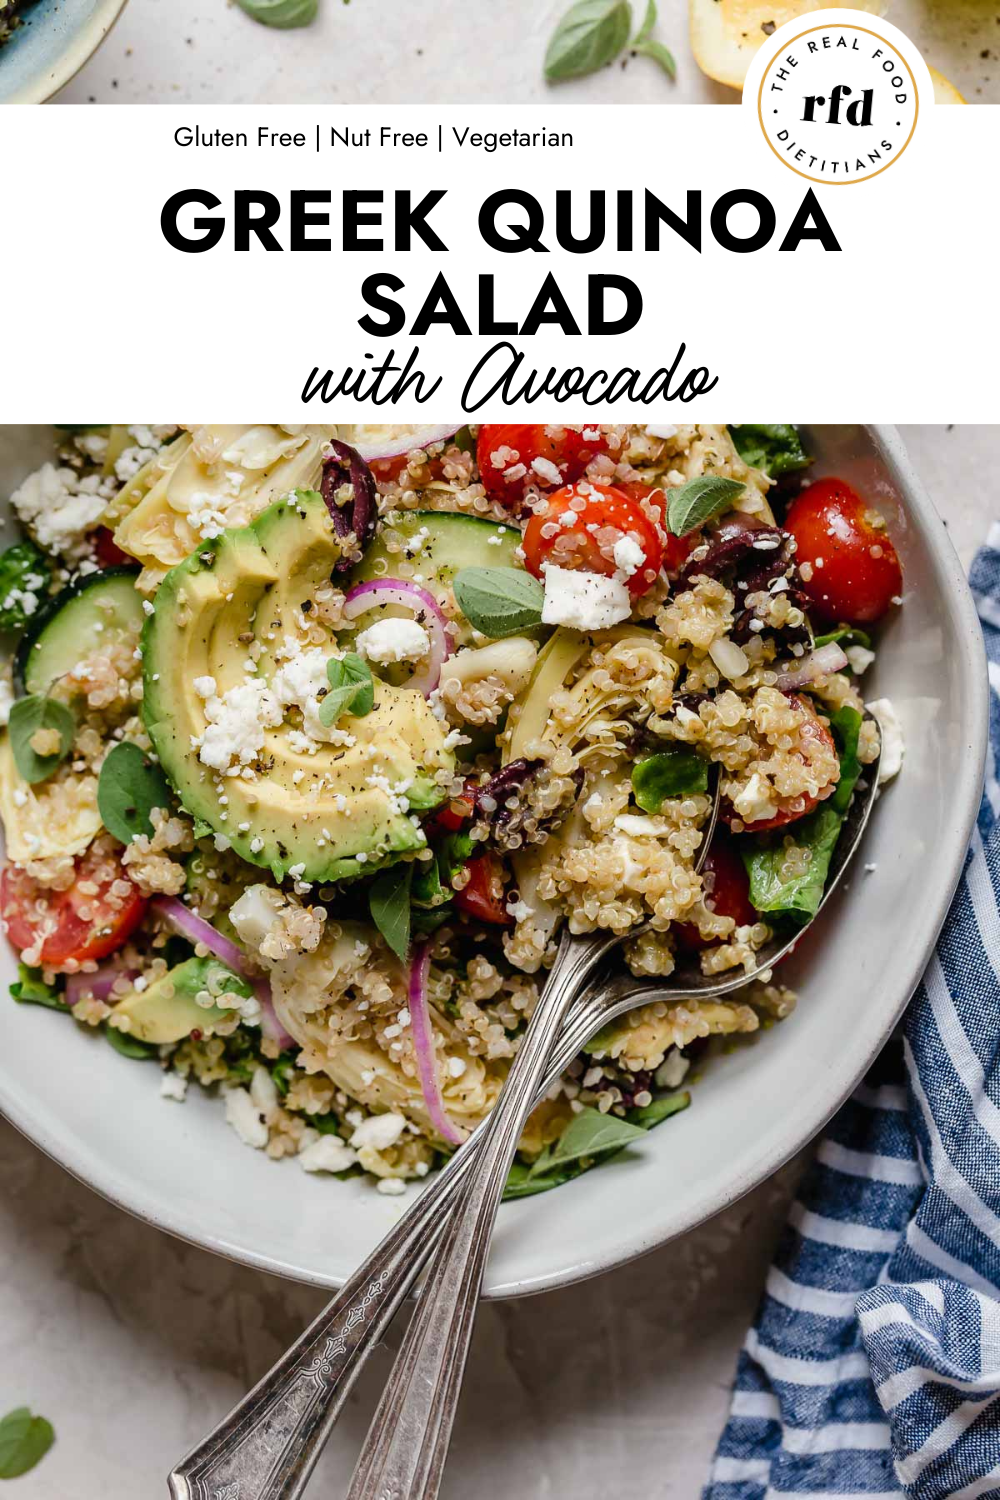 https://therealfooddietitians.com/wp-content/uploads/2023/05/Greek-Quinoa-Salad-with-Avocado-1000-%C3%97-1500-px.png